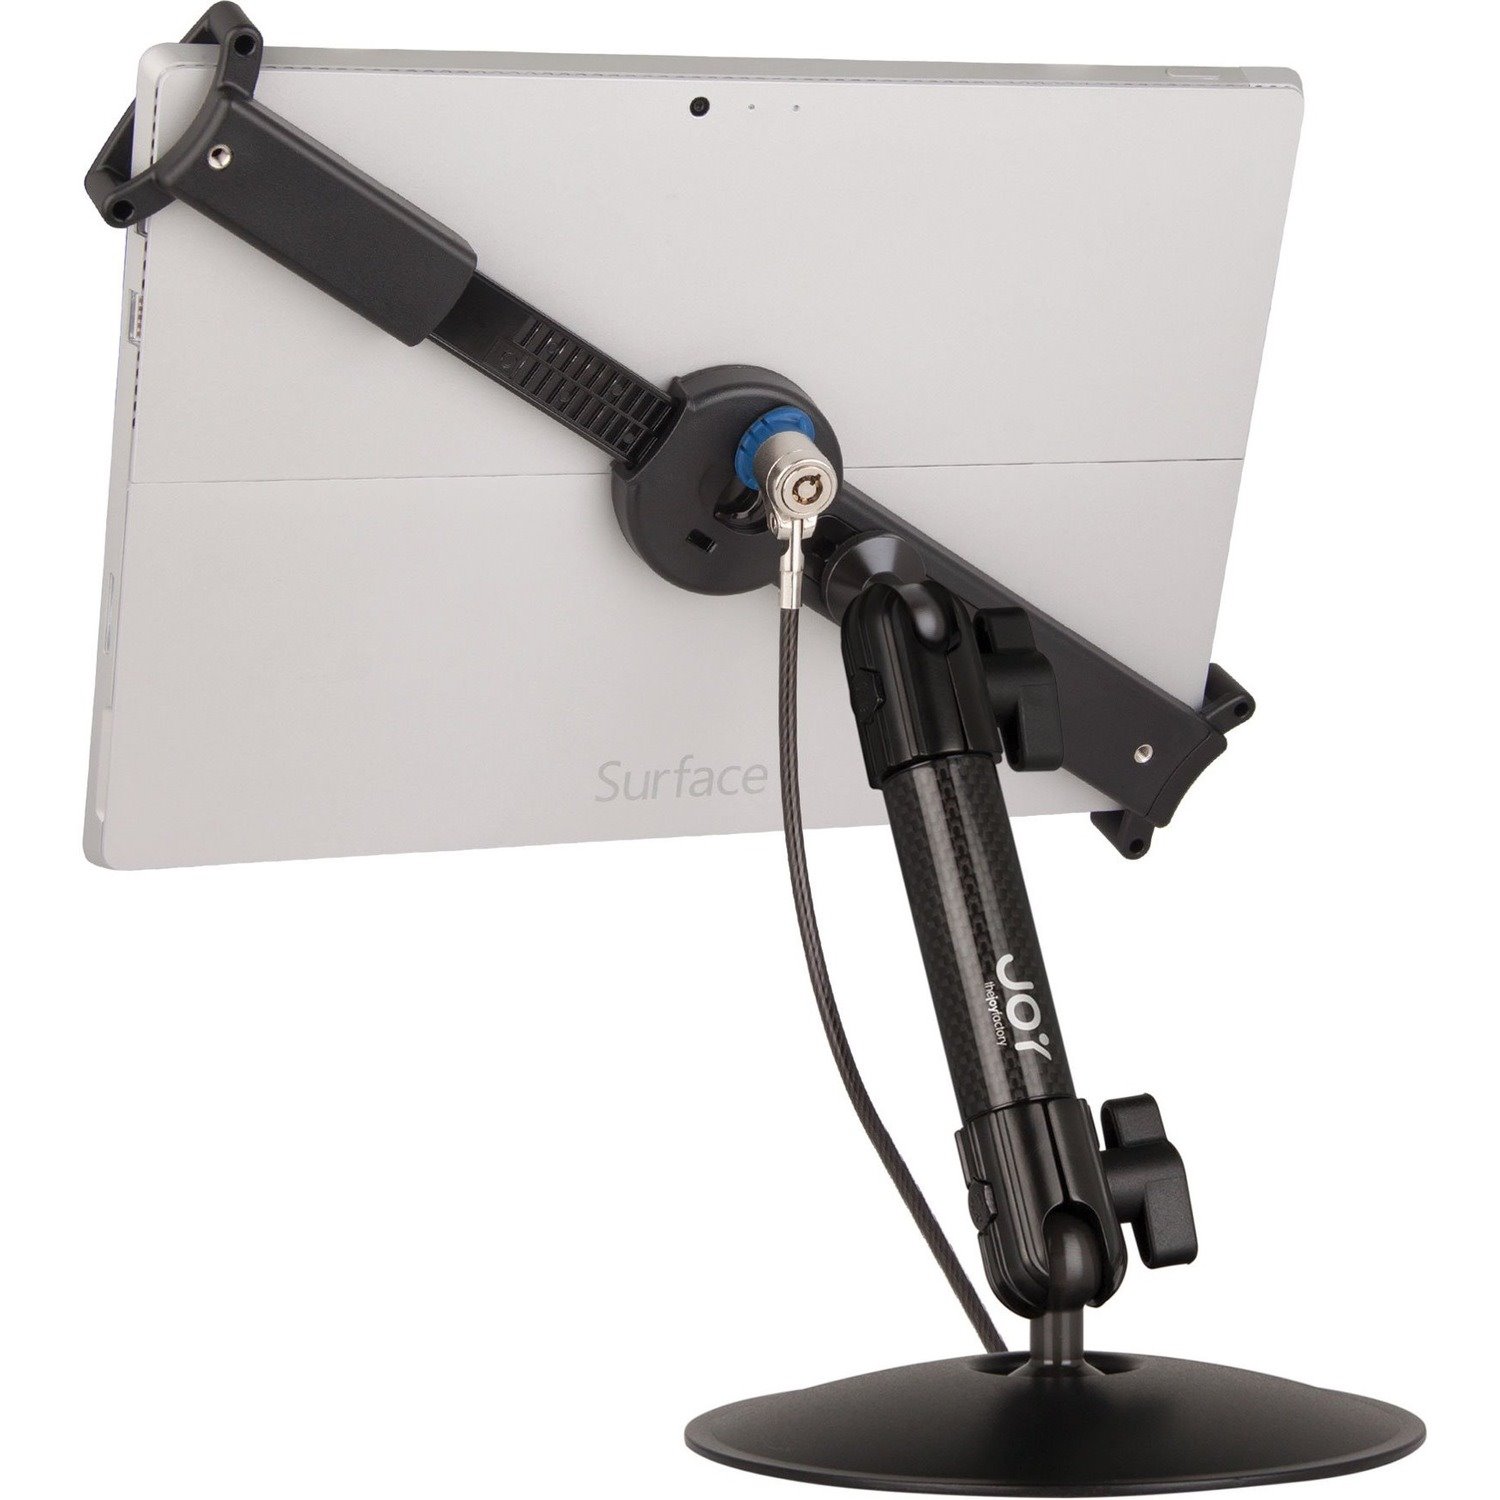 The Joy Factory LockDown Tablet PC Stand